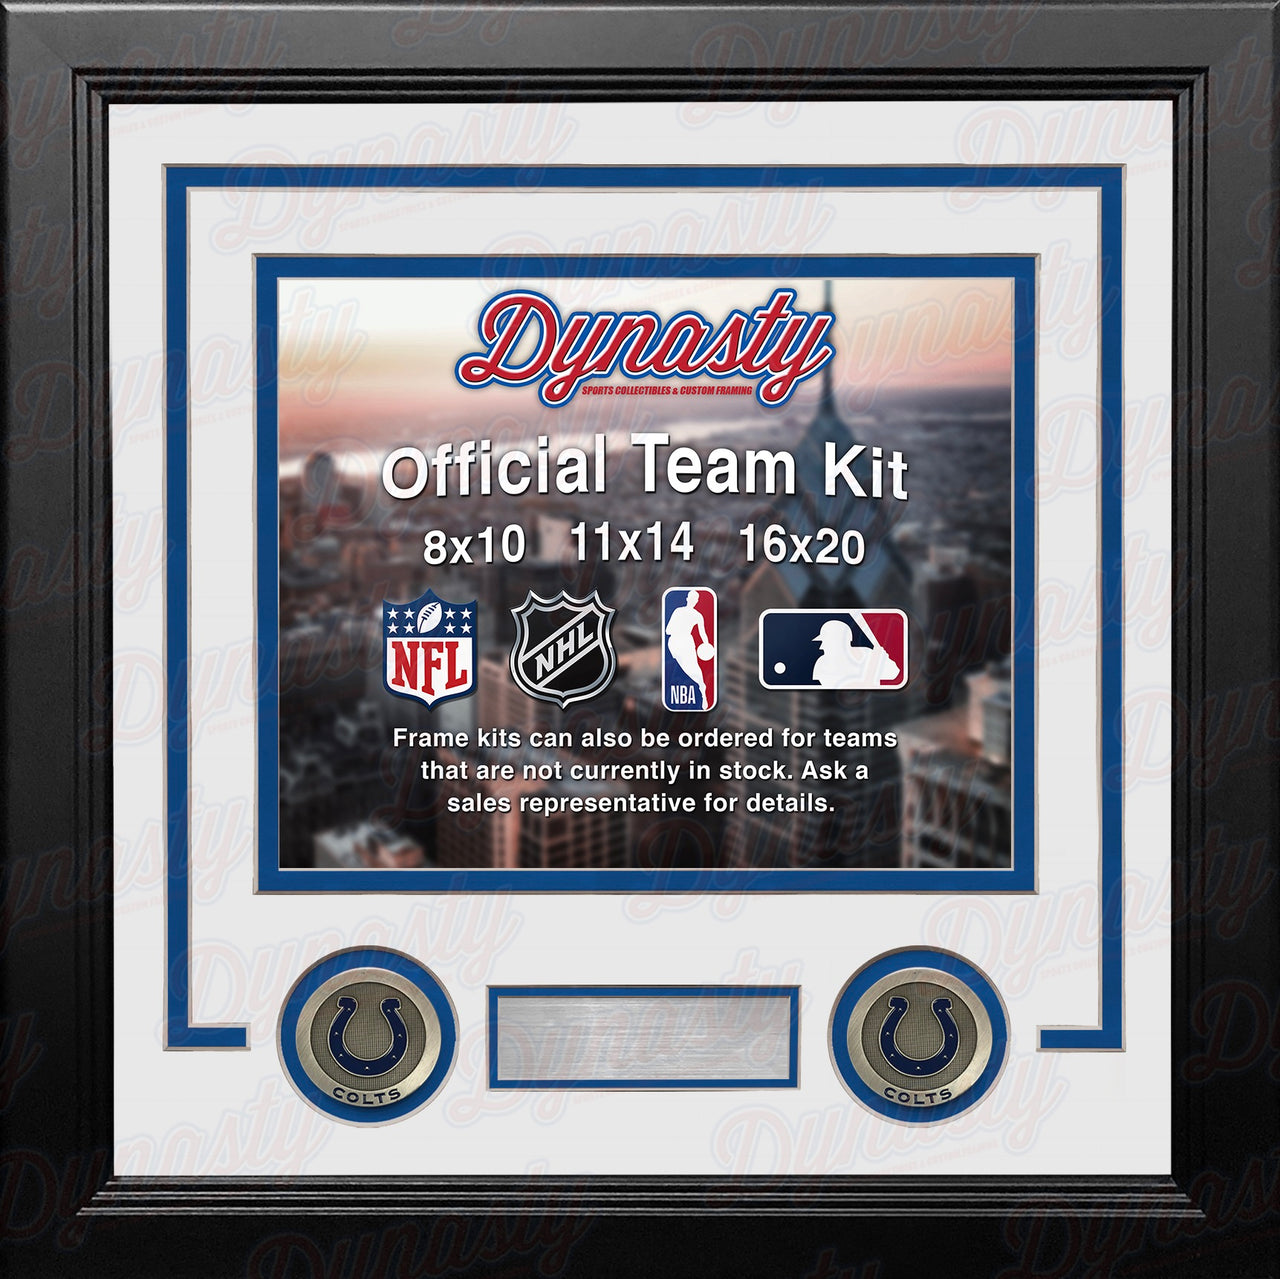 Indianapolis Colts Custom NFL Football 16x20 Picture Frame Kit (Multiple Colors) - Dynasty Sports & Framing 